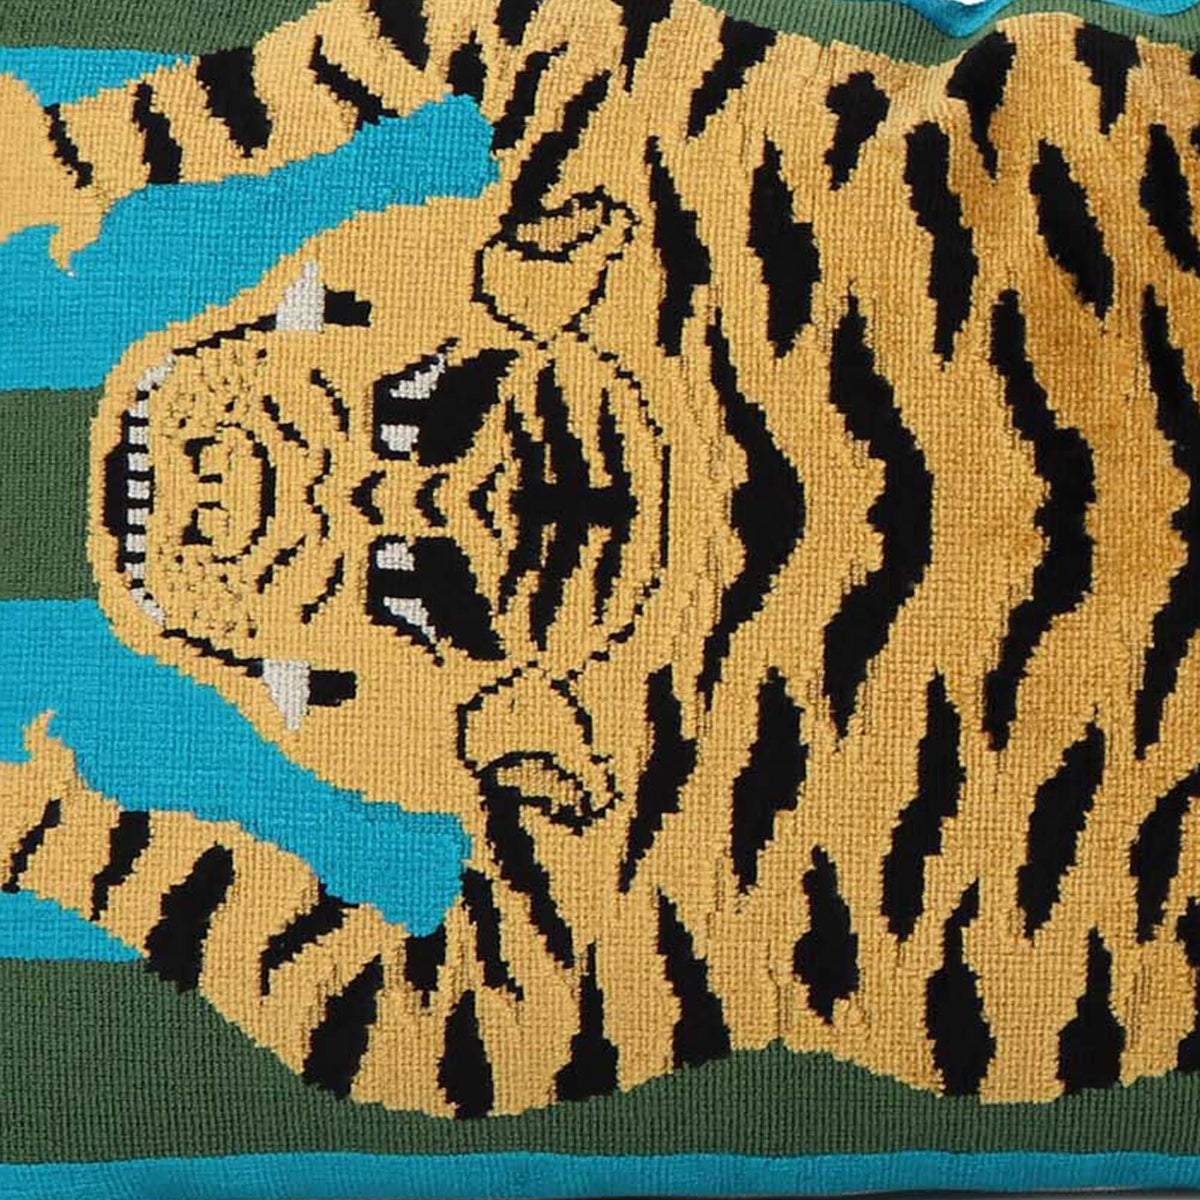 Jokhang Tiger Velvet Peacock &amp; Olive / 4x4 inch Fabric Swatch